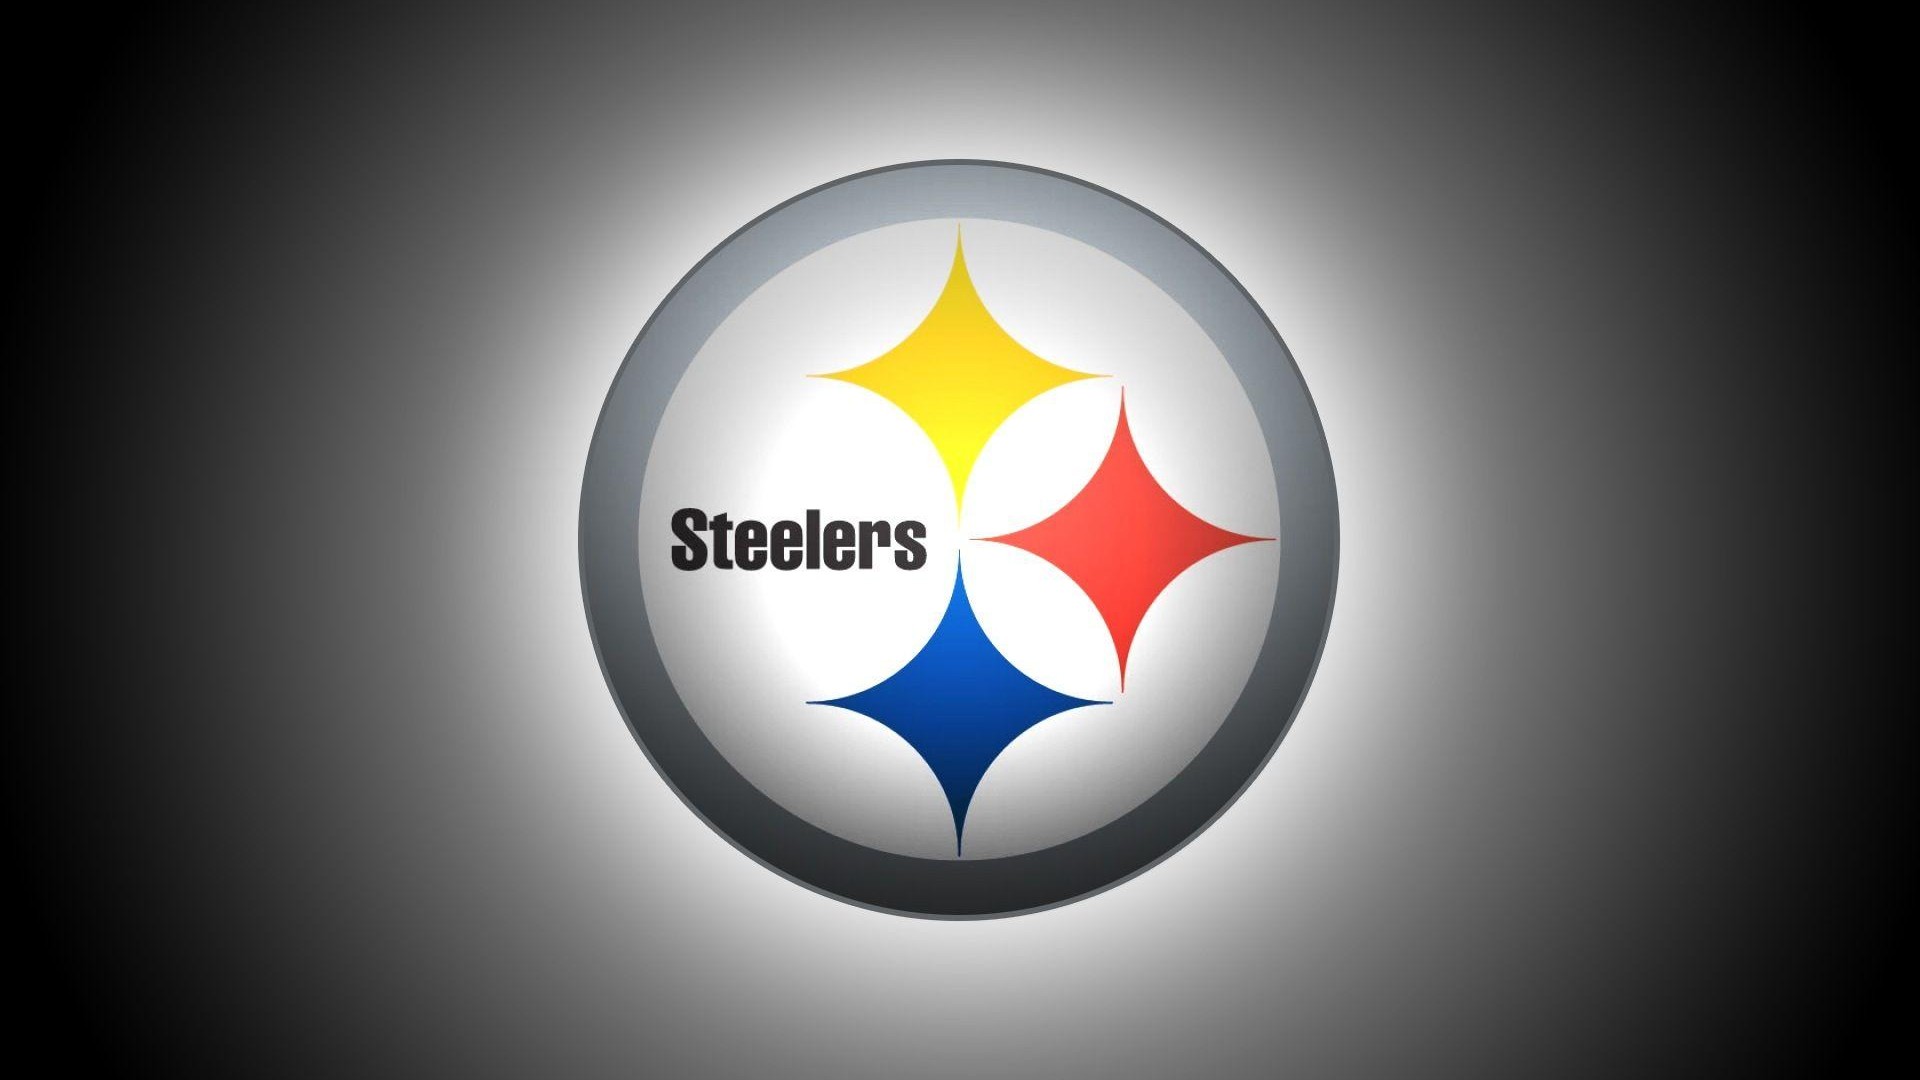 Pittsburgh Steelers Wallpaper HD Logos And Uniforms Of The